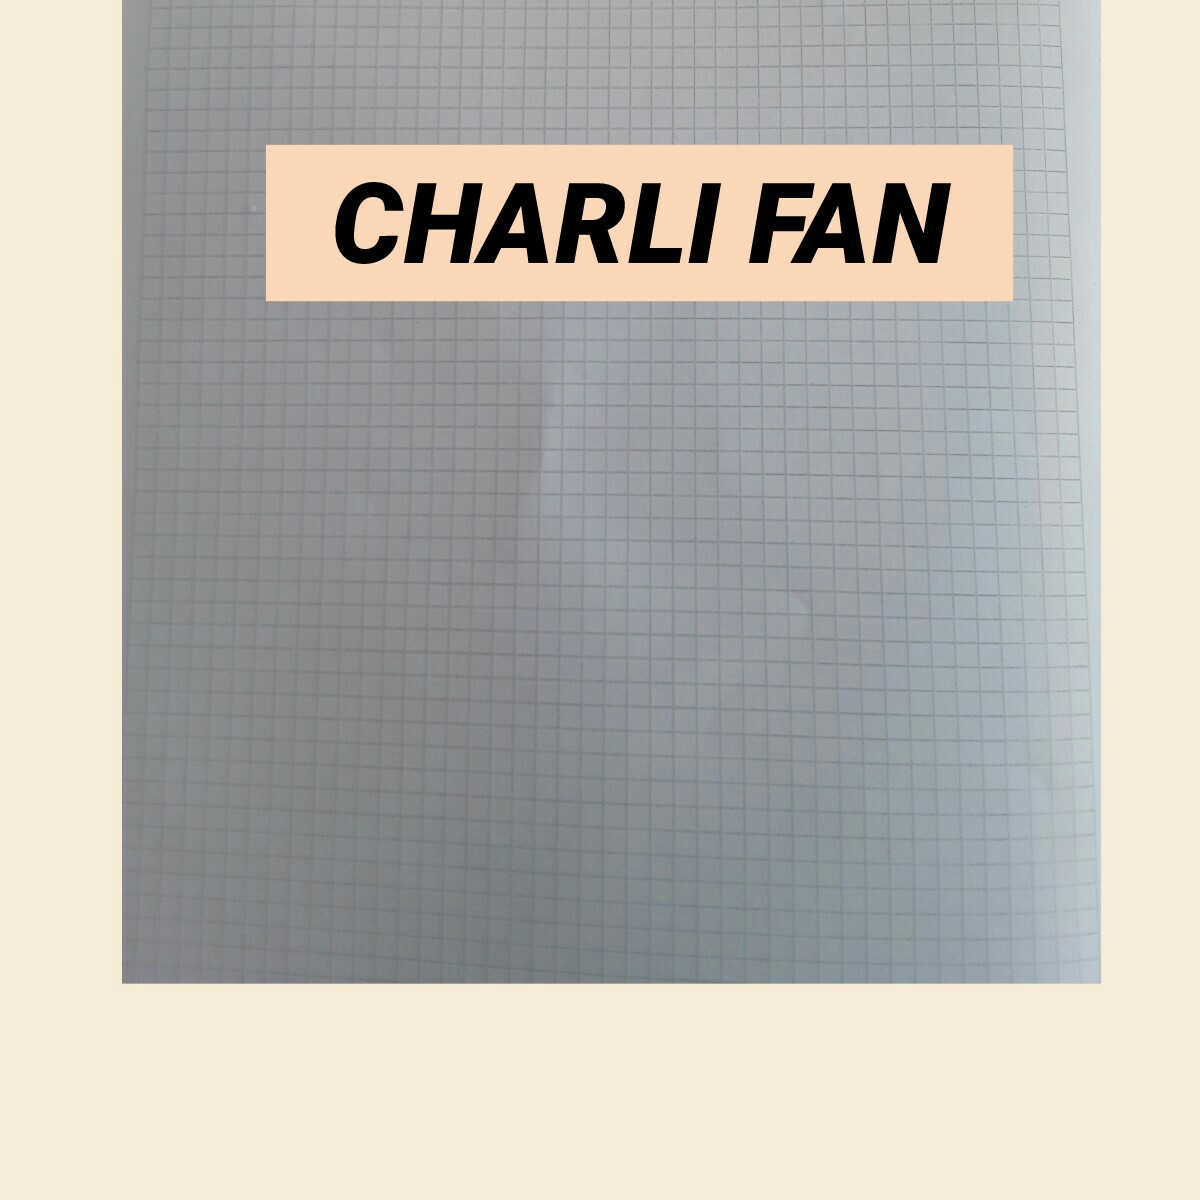 Are you Charli Fan????